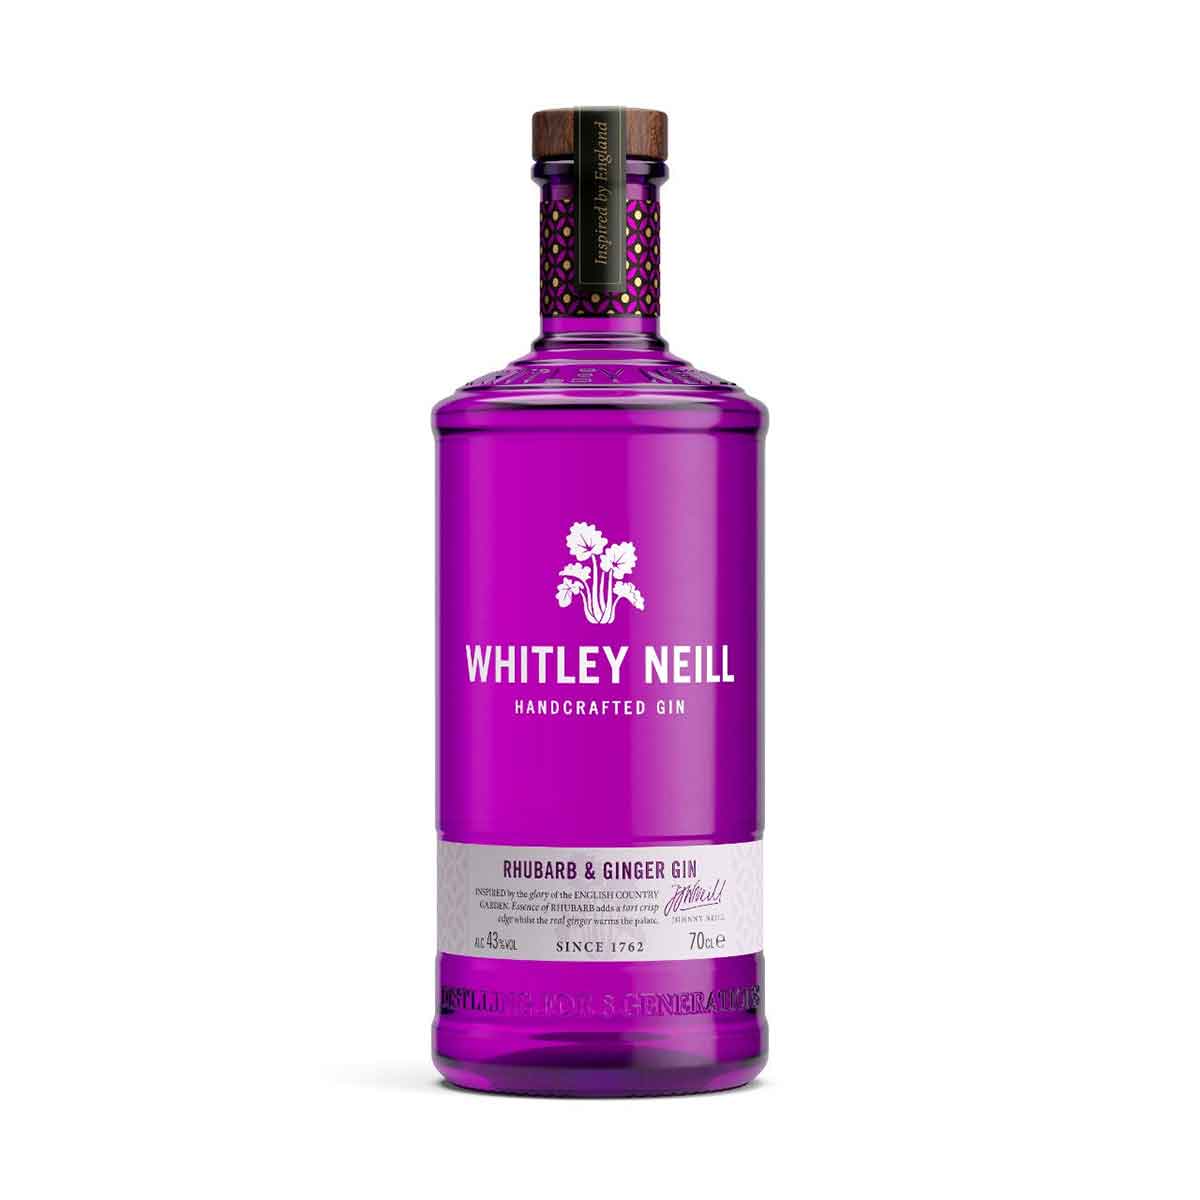 TAG Liquor Stores BC-WHITLEY NEILL RHUBARB & GINGER GIN 750M